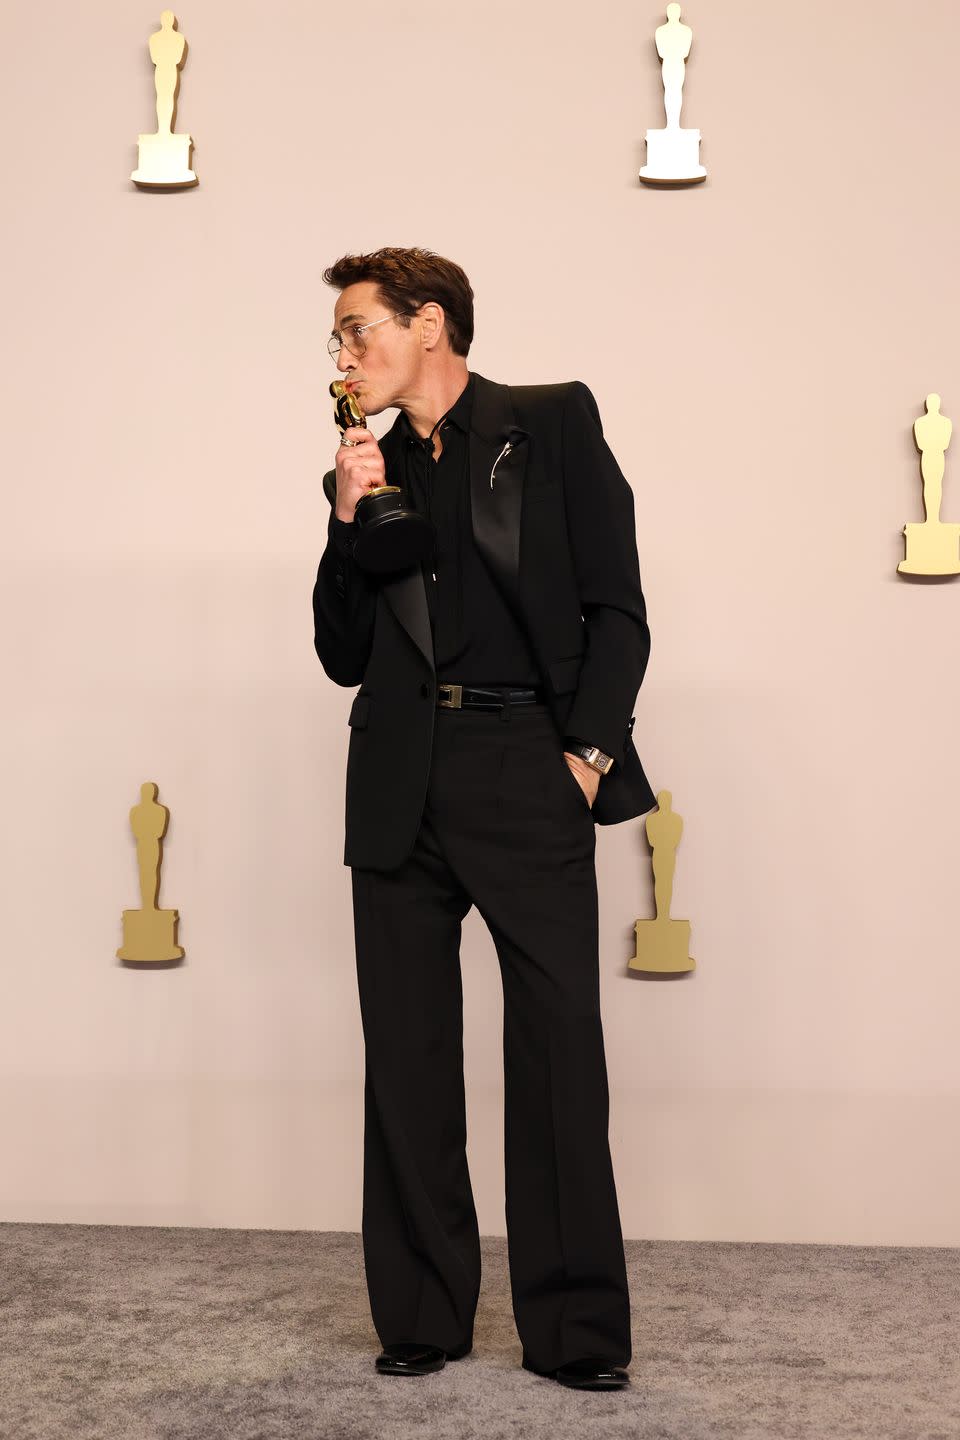 hollywood, california march 10 robert downey jr, winner of the best actor in a supporting role award for poses in the press room during the 96th annual academy awards at ovation hollywood on march 10, 2024 in hollywood, california photo by john shearerwireimage